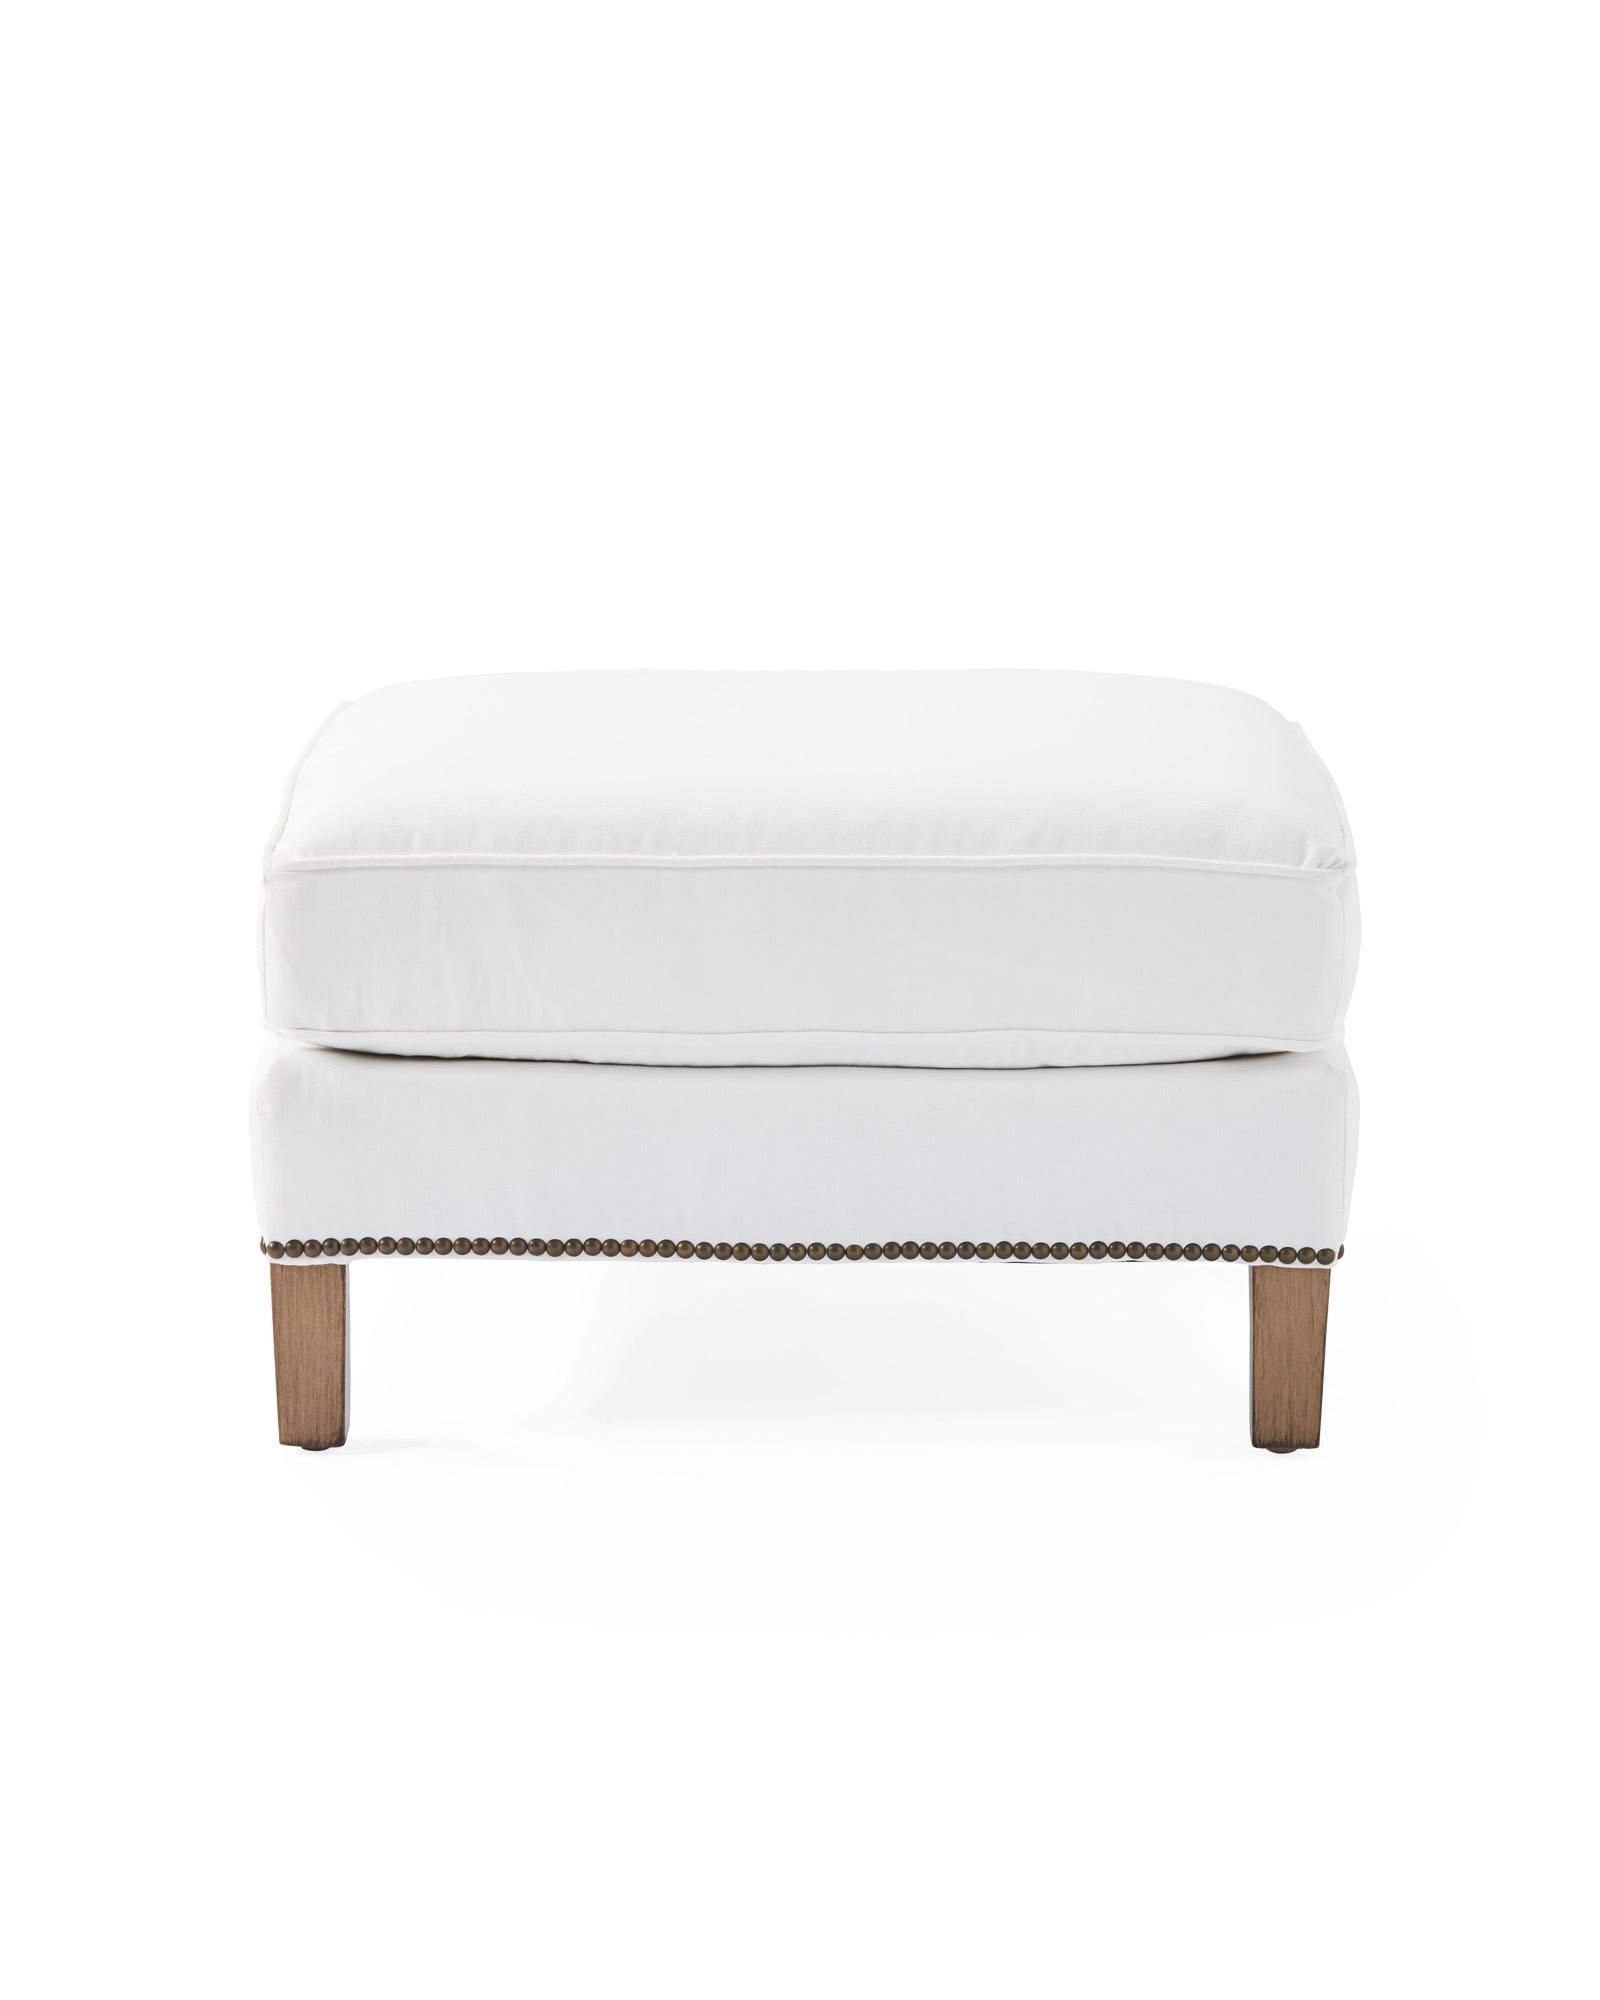 Canyon Ottoman with Nailheads | Serena and Lily